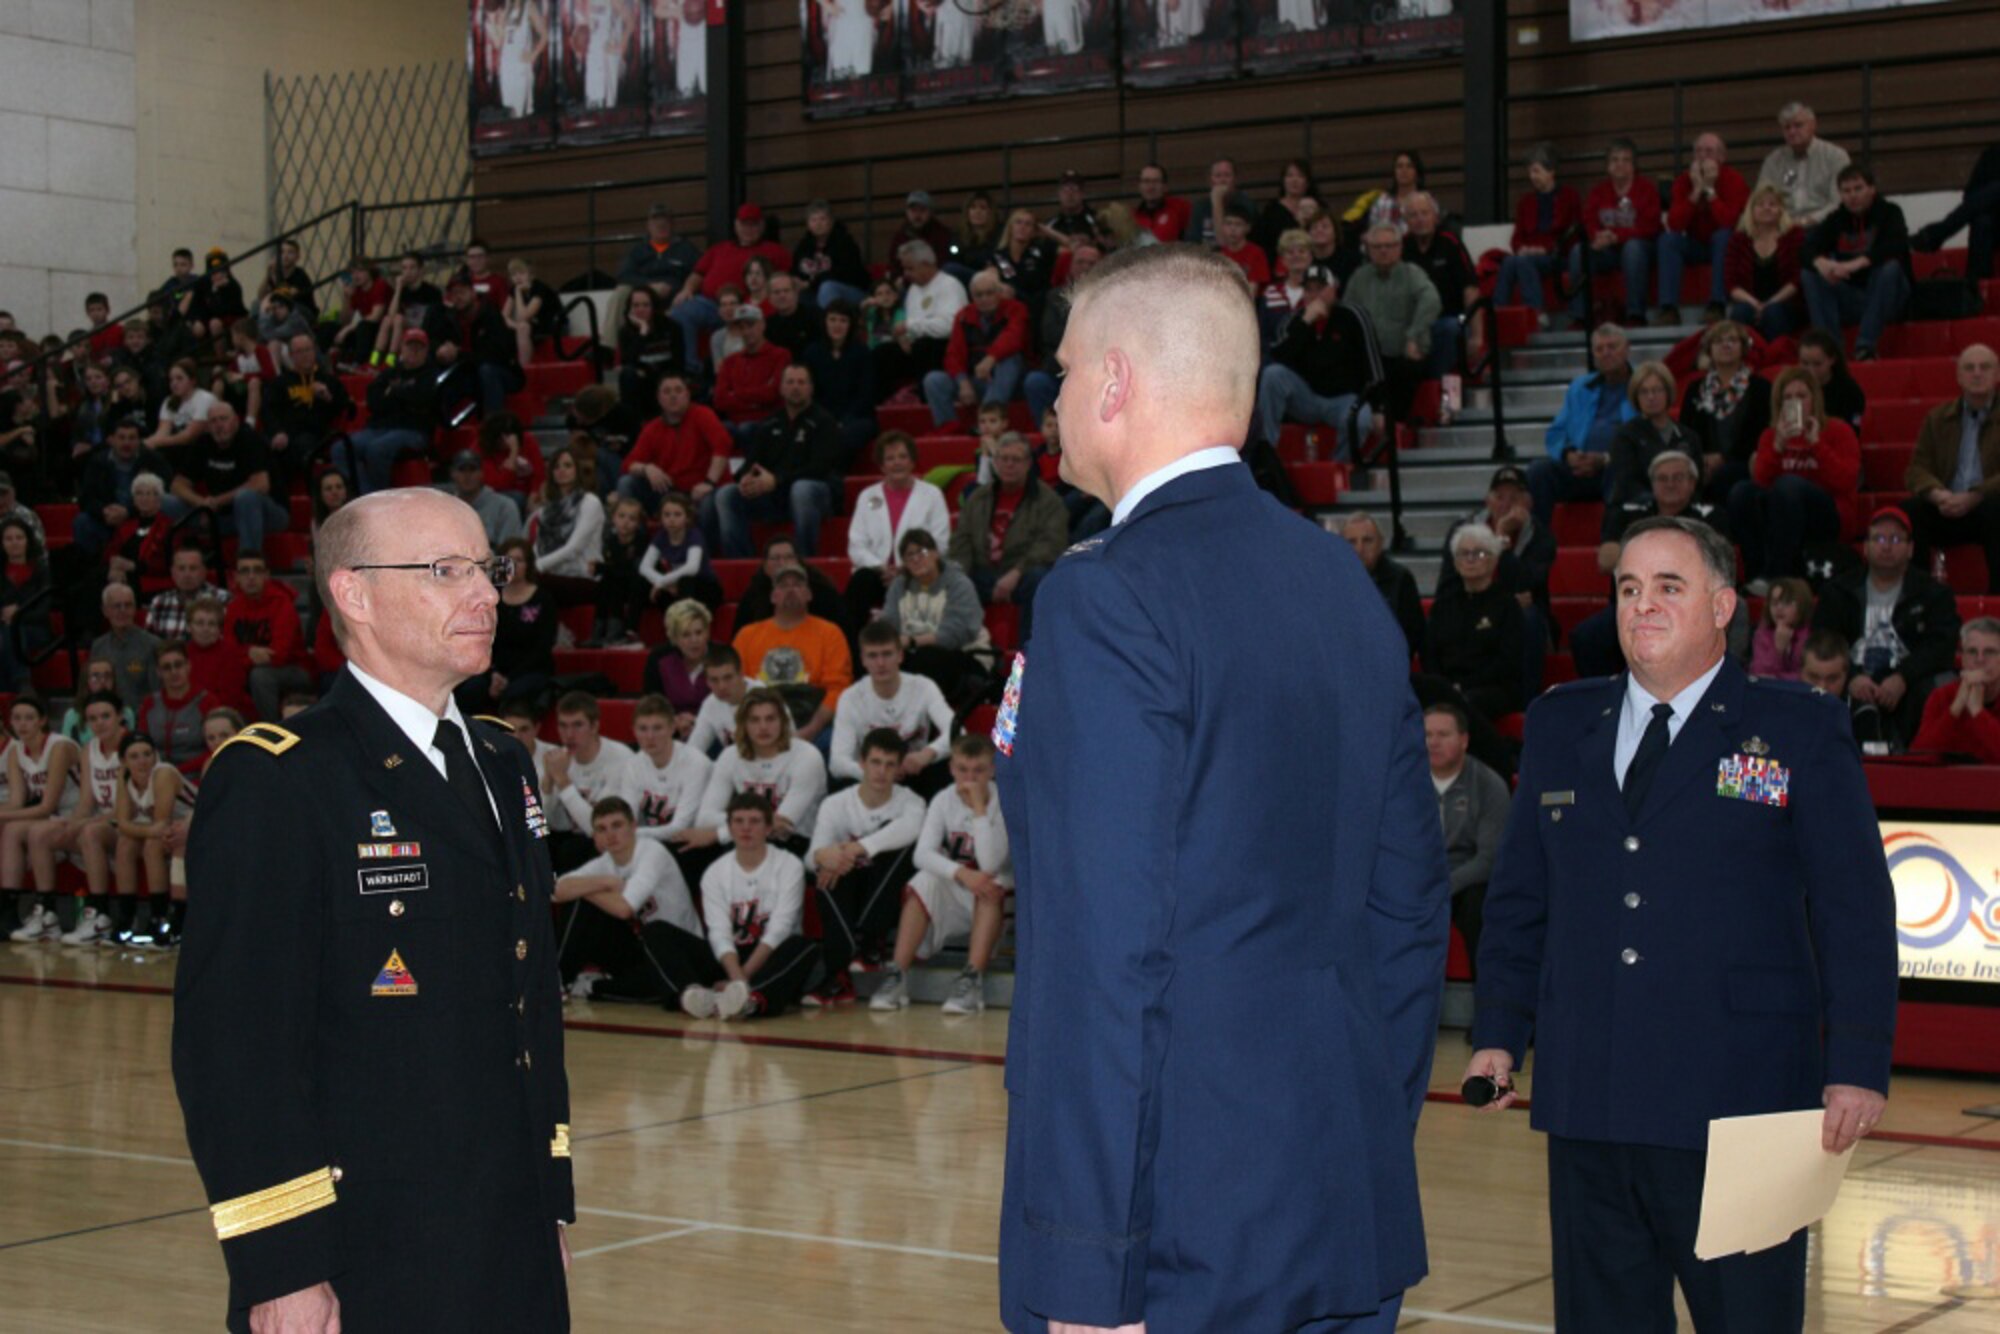 Newly-promoted Col. Justin Wagner, Iowa Air National Guard (center) stands at attention as his promotion orders to colonel are being read. Also present are Brig. Gen. Steve Warnstadt, Iowa Army National Guard (left) and Col. Joe Ascherl, Iowa Air National Guard. Wagner, the Harlan Community Schools superintendent, also serves as the Chief of Personnel for the Joint Planning Group, Iowa National Guard. (U.S. Army National Guard photo by Master Sgt. Duff E. McFadden)